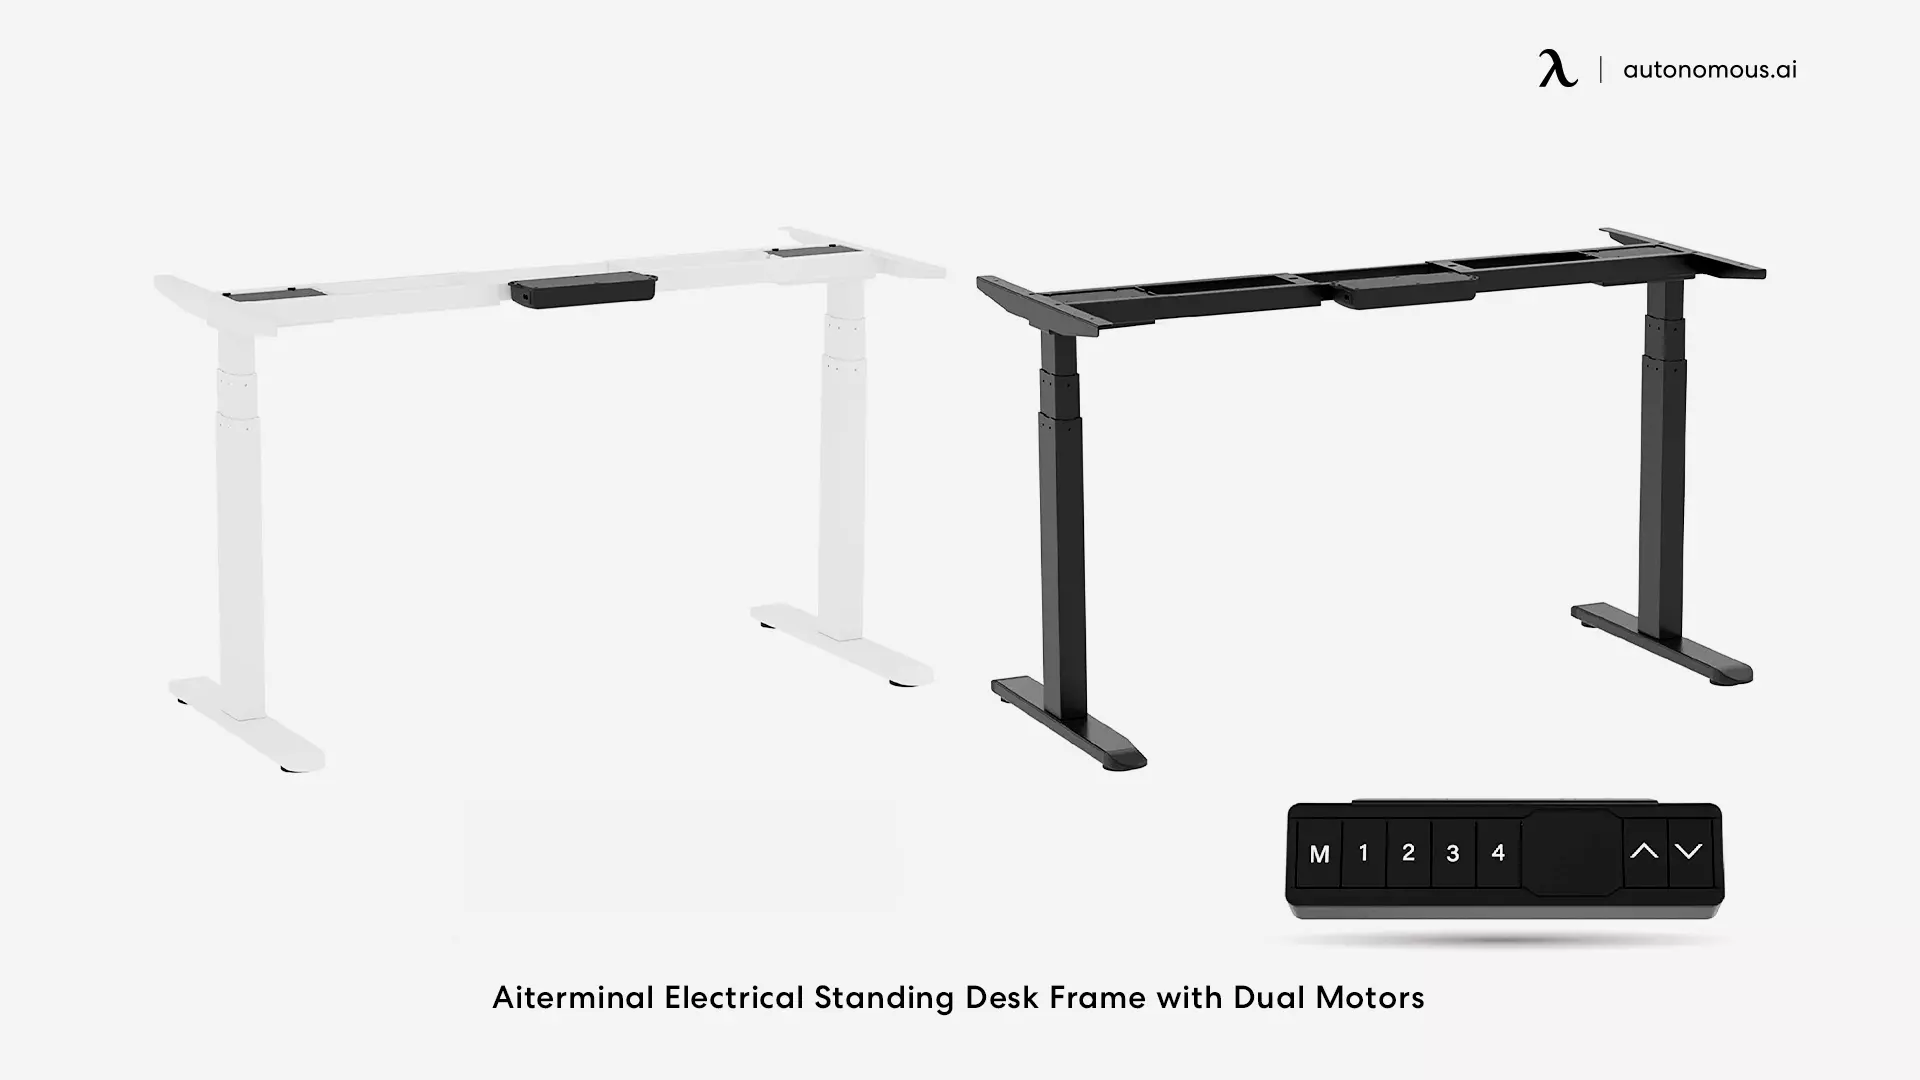 Terminal Electrical Standing Desk Frame with Dual Motors